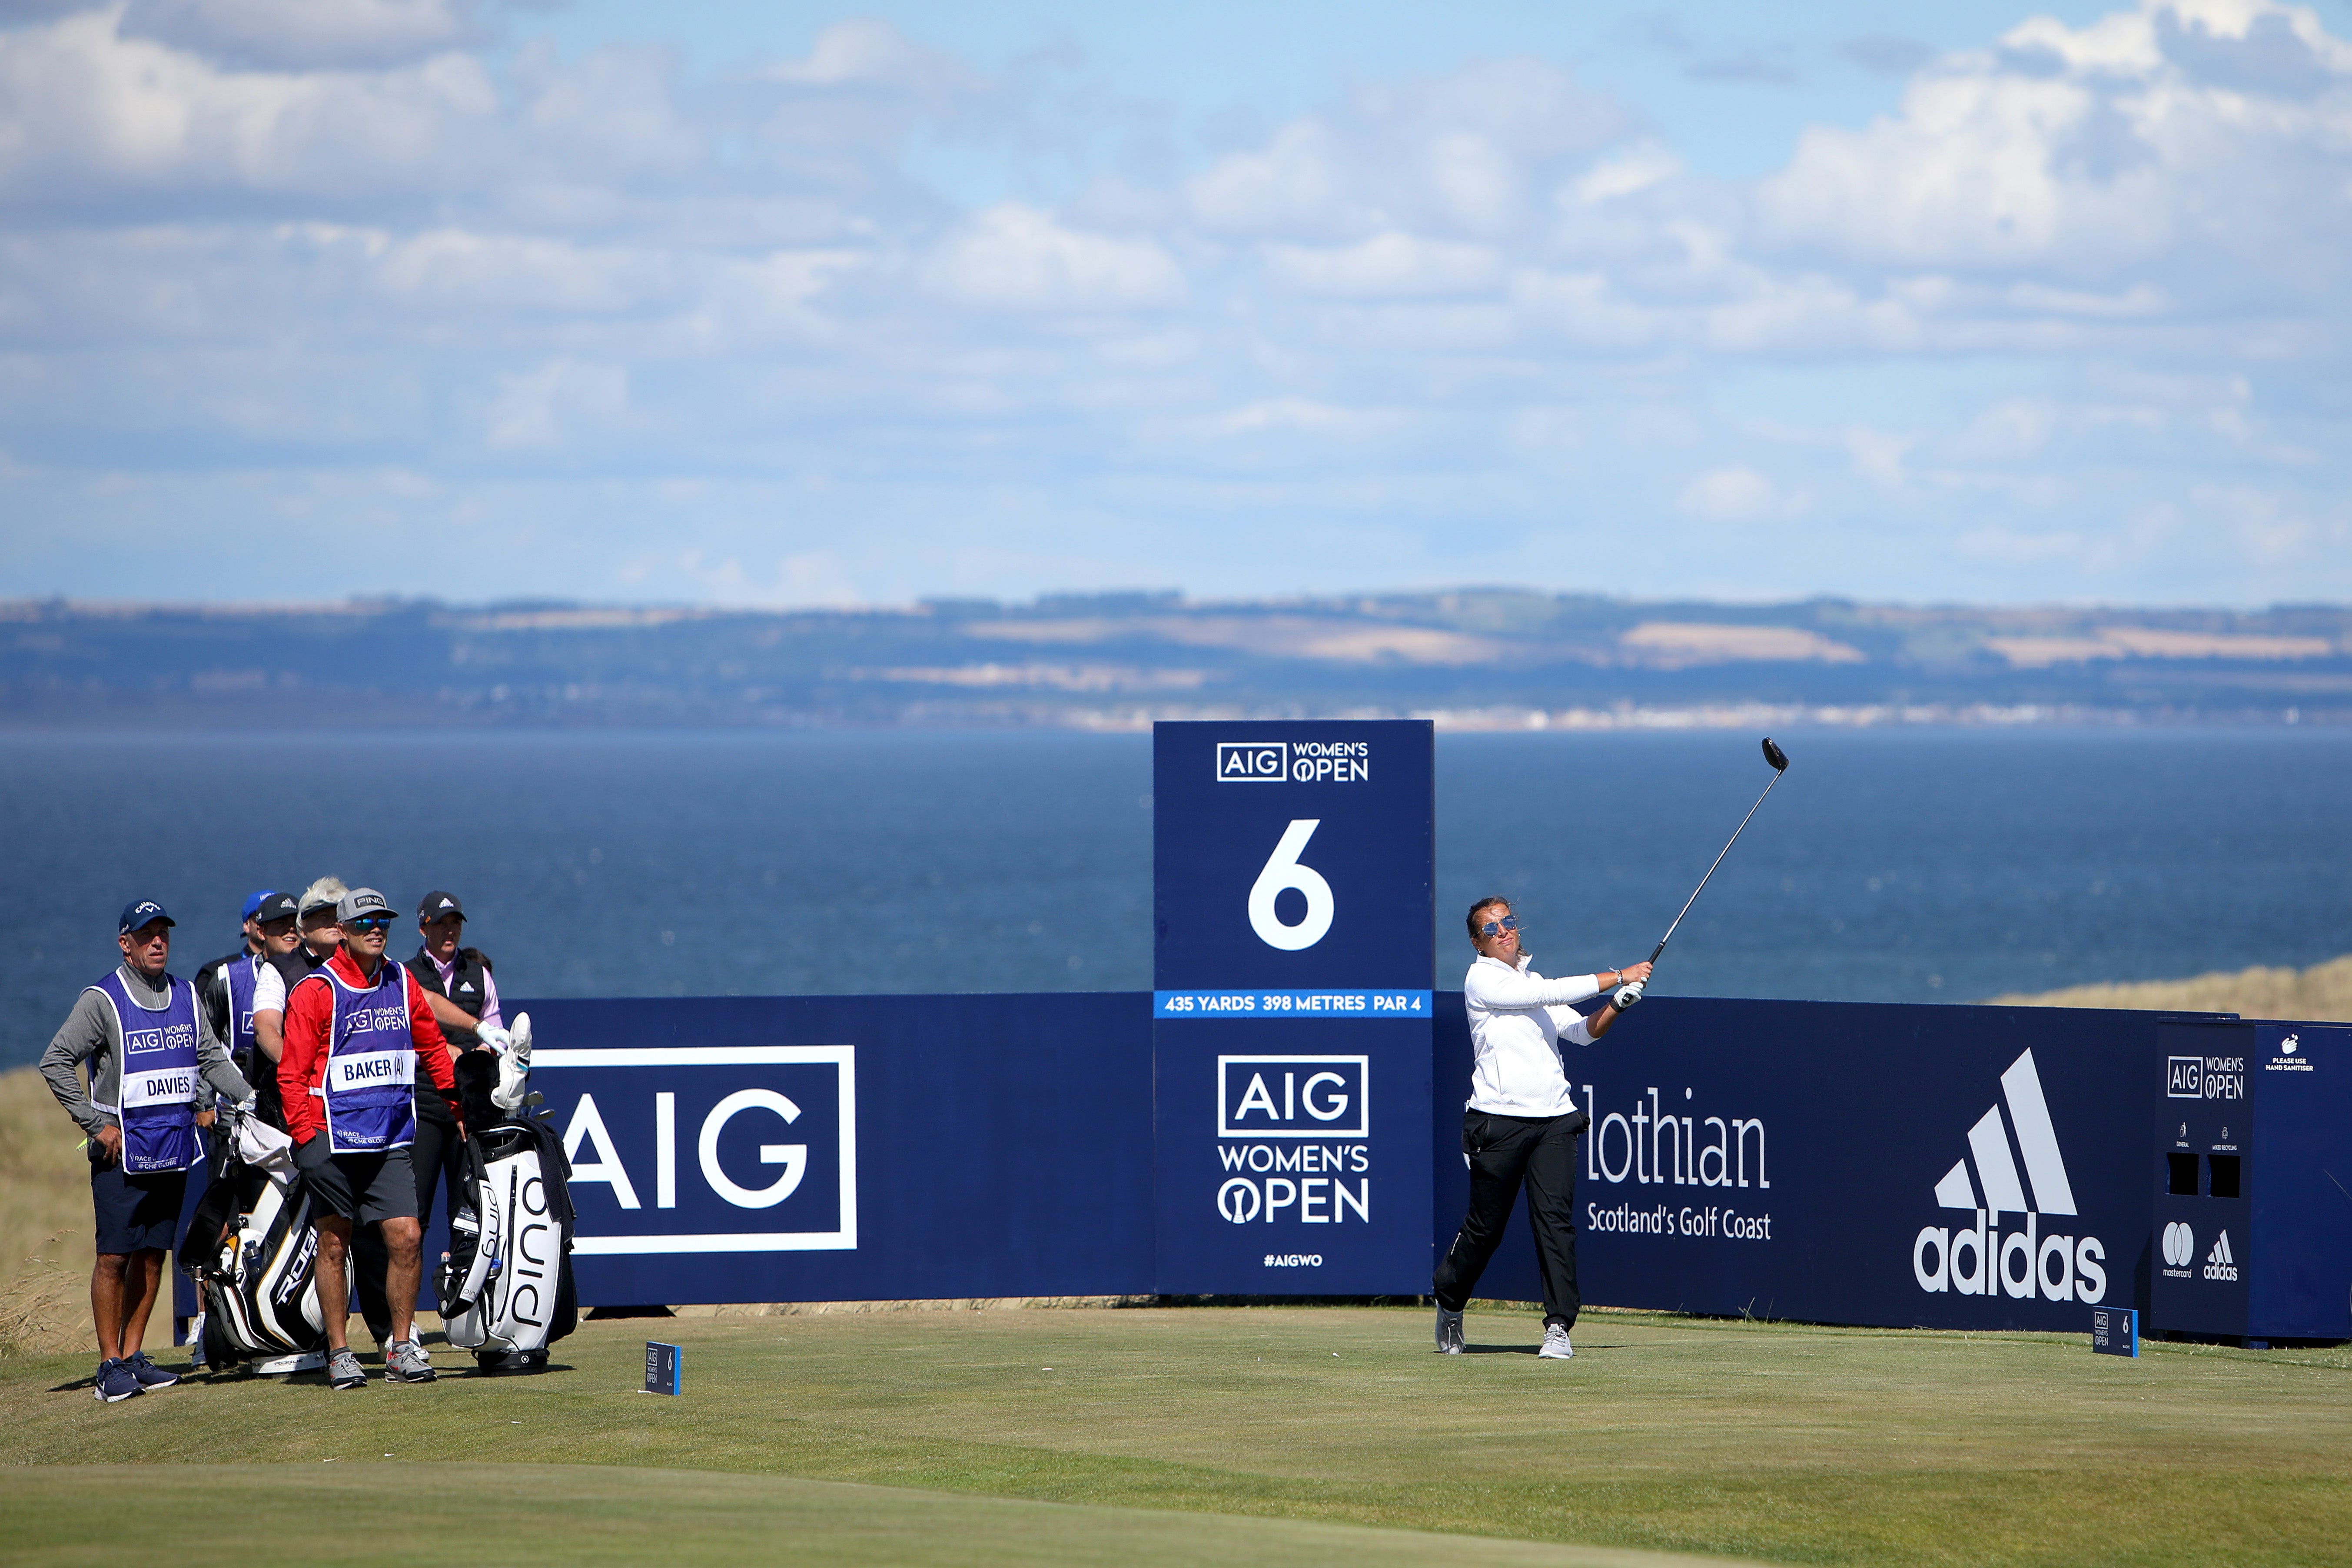 The AIG Womens Open Live Blog